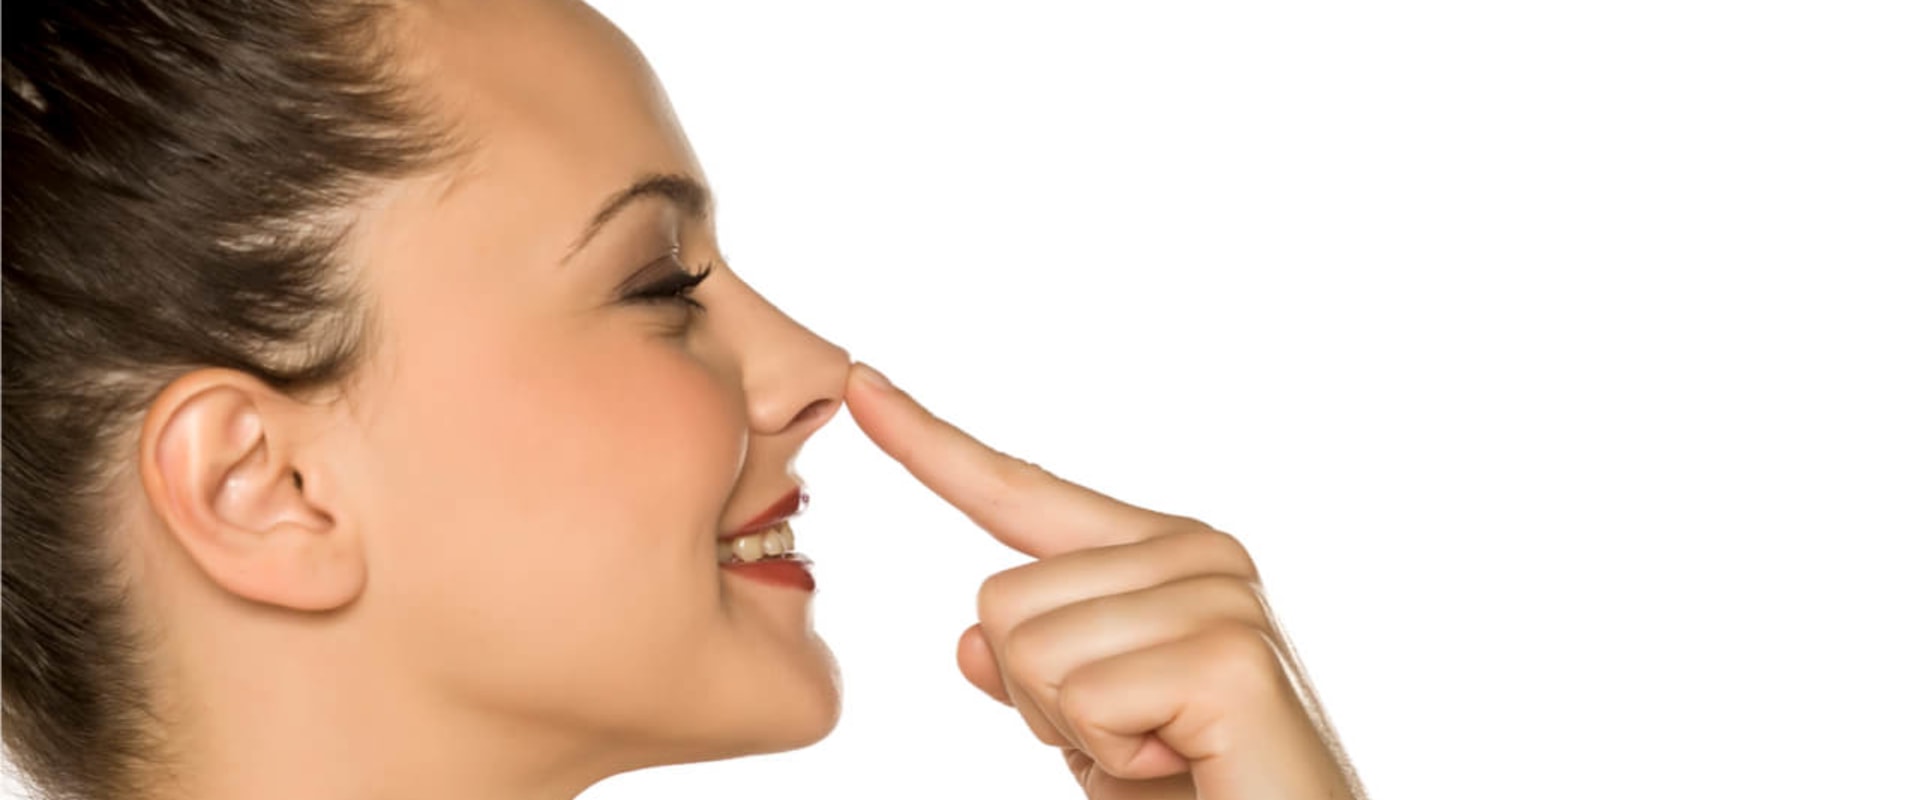 Affording a Nose Job: Financial Options for Cosmetic Surgery